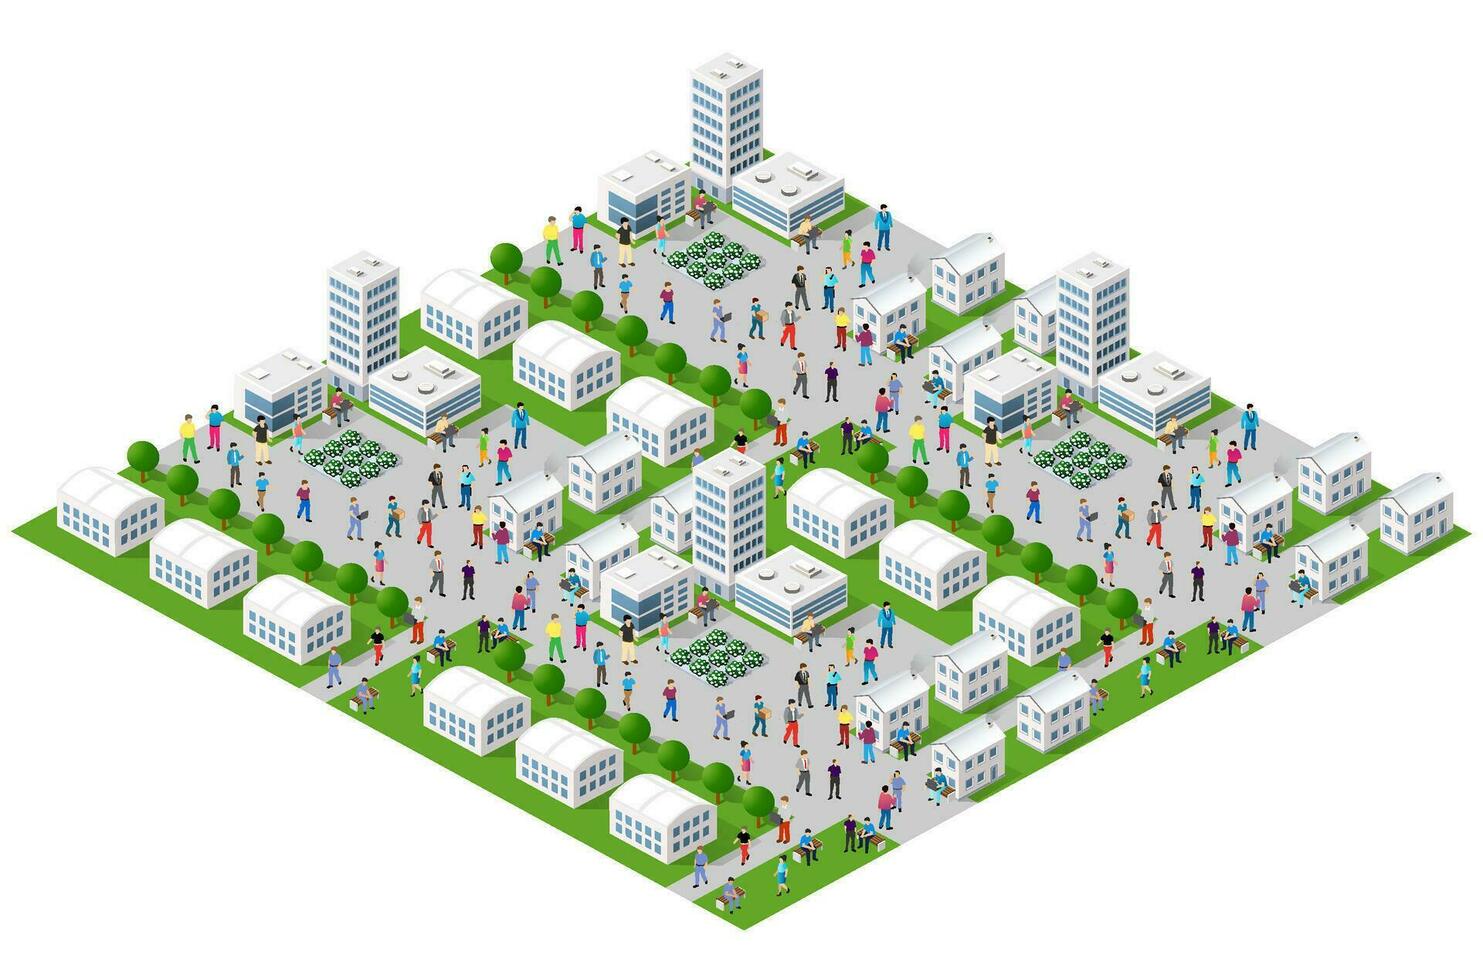 The city lifestyle scene on urban themes with houses, cars, people, trees and parks. Concept isometric 3d illustrations vector for design, games, web